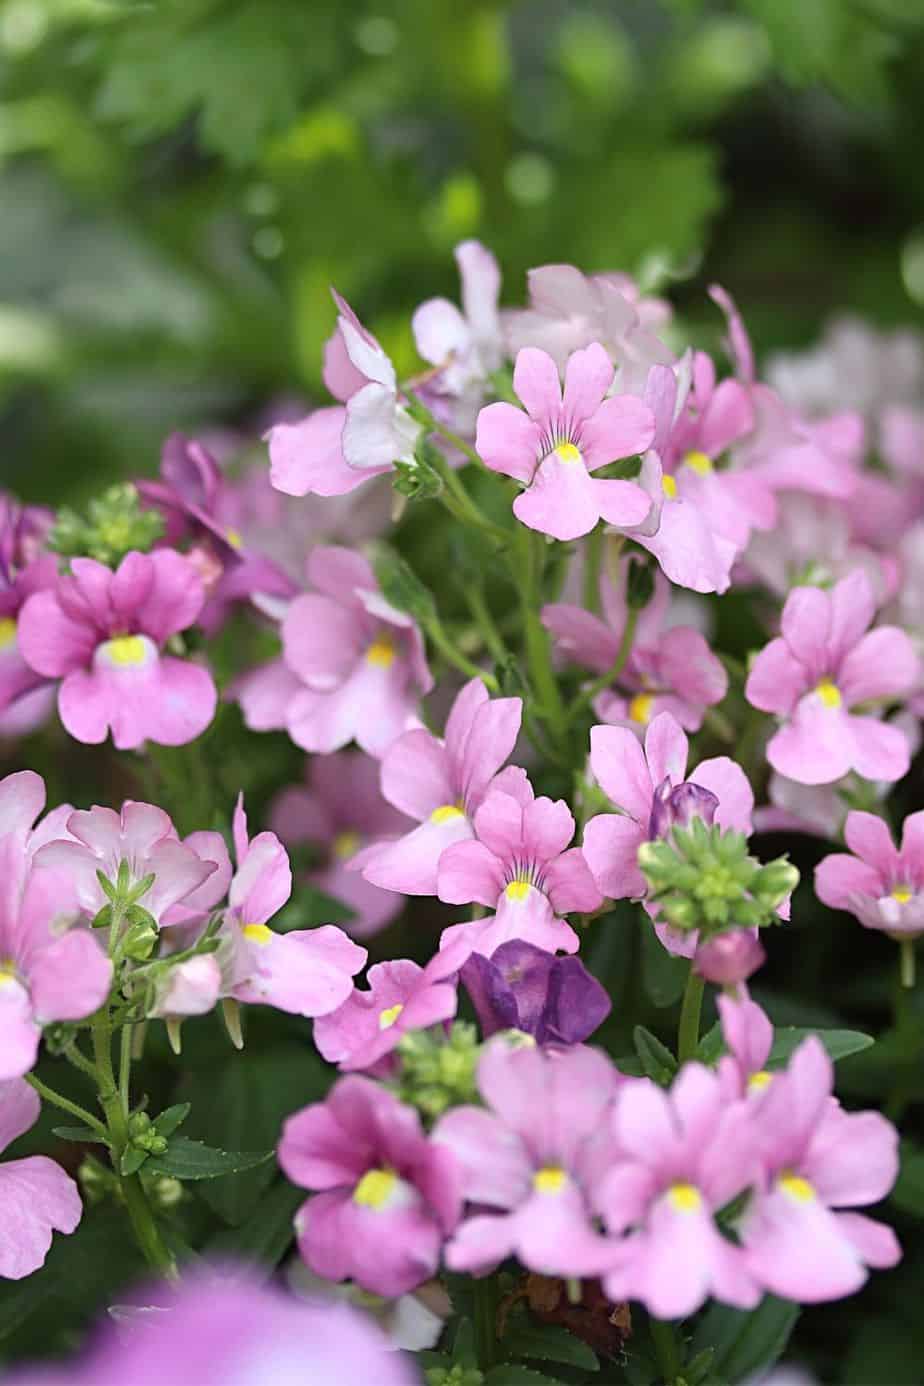 Nemesia is a short-lived perennial plant that you can grow easily on your east facing balcony